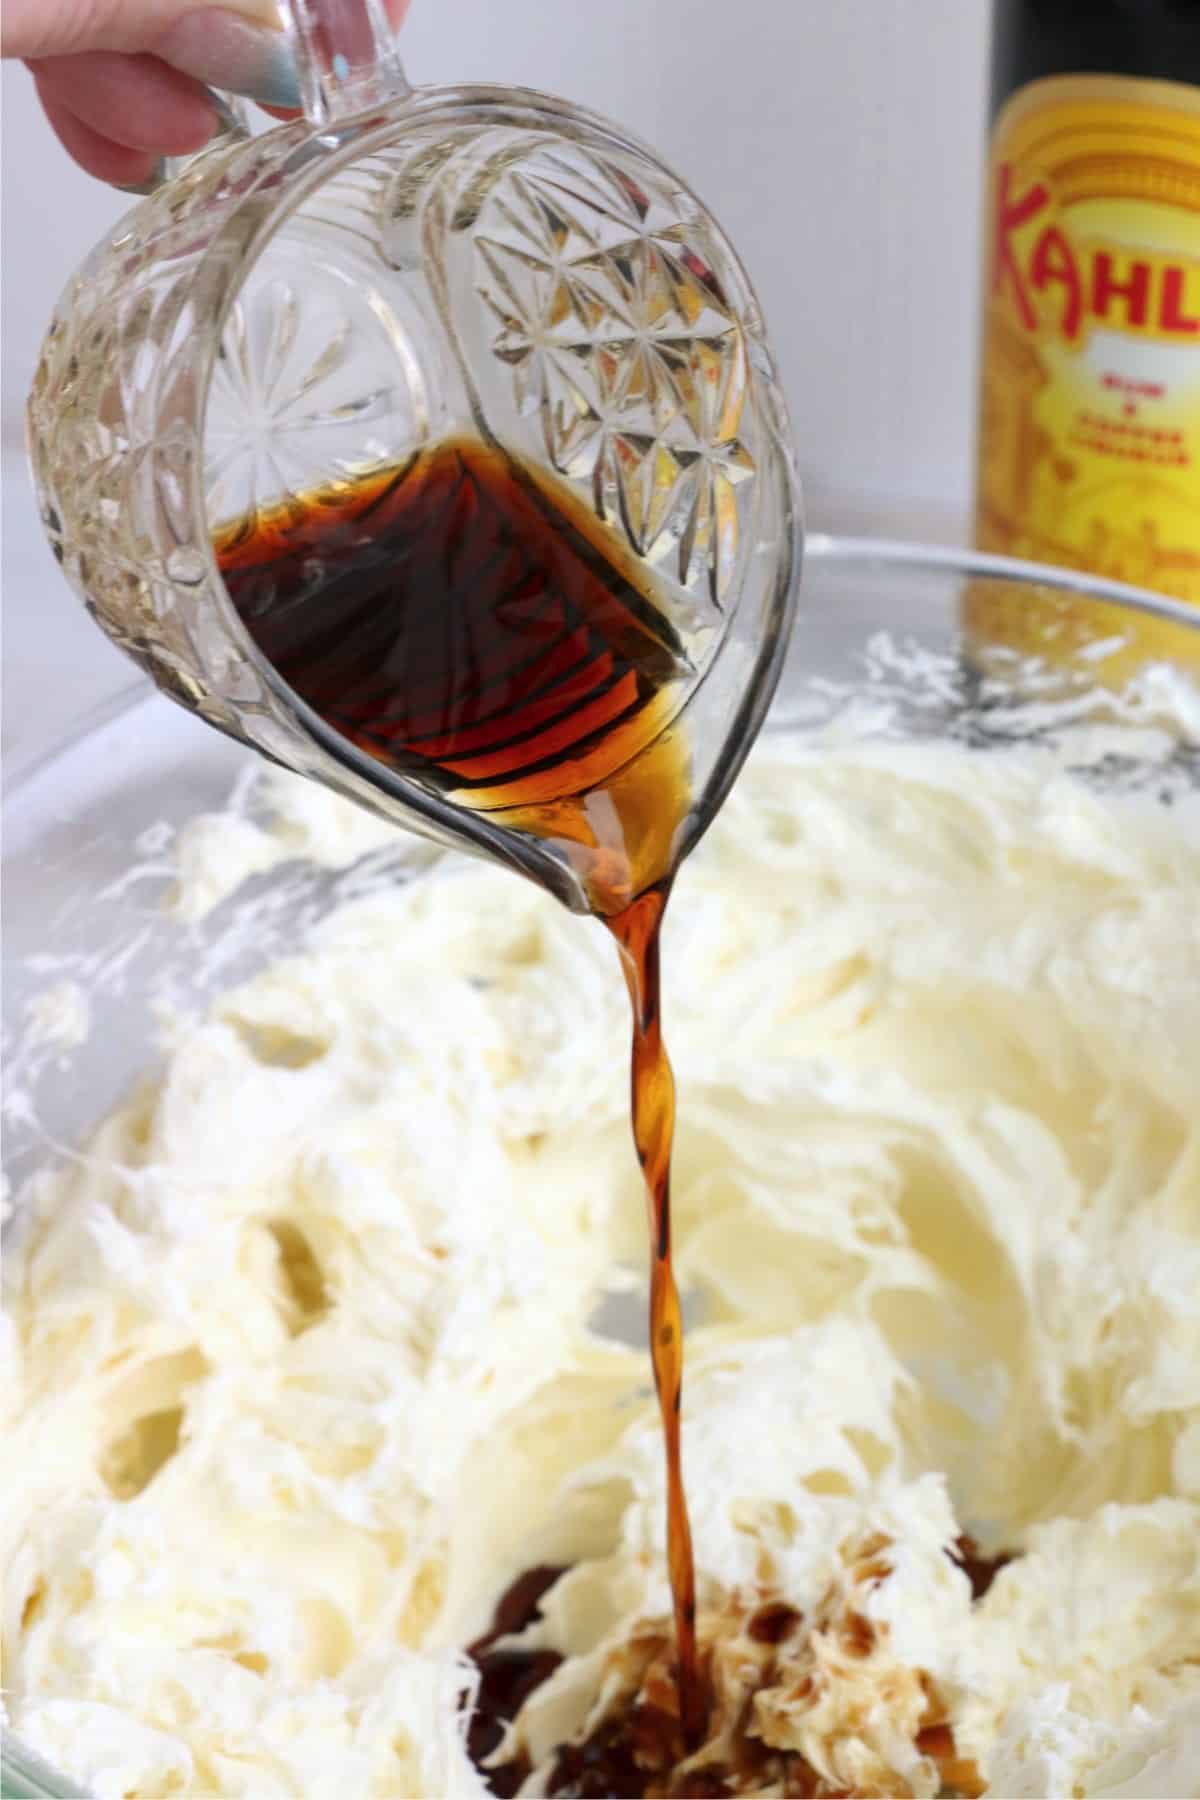 Kahlua being poured into creamed cream cheese